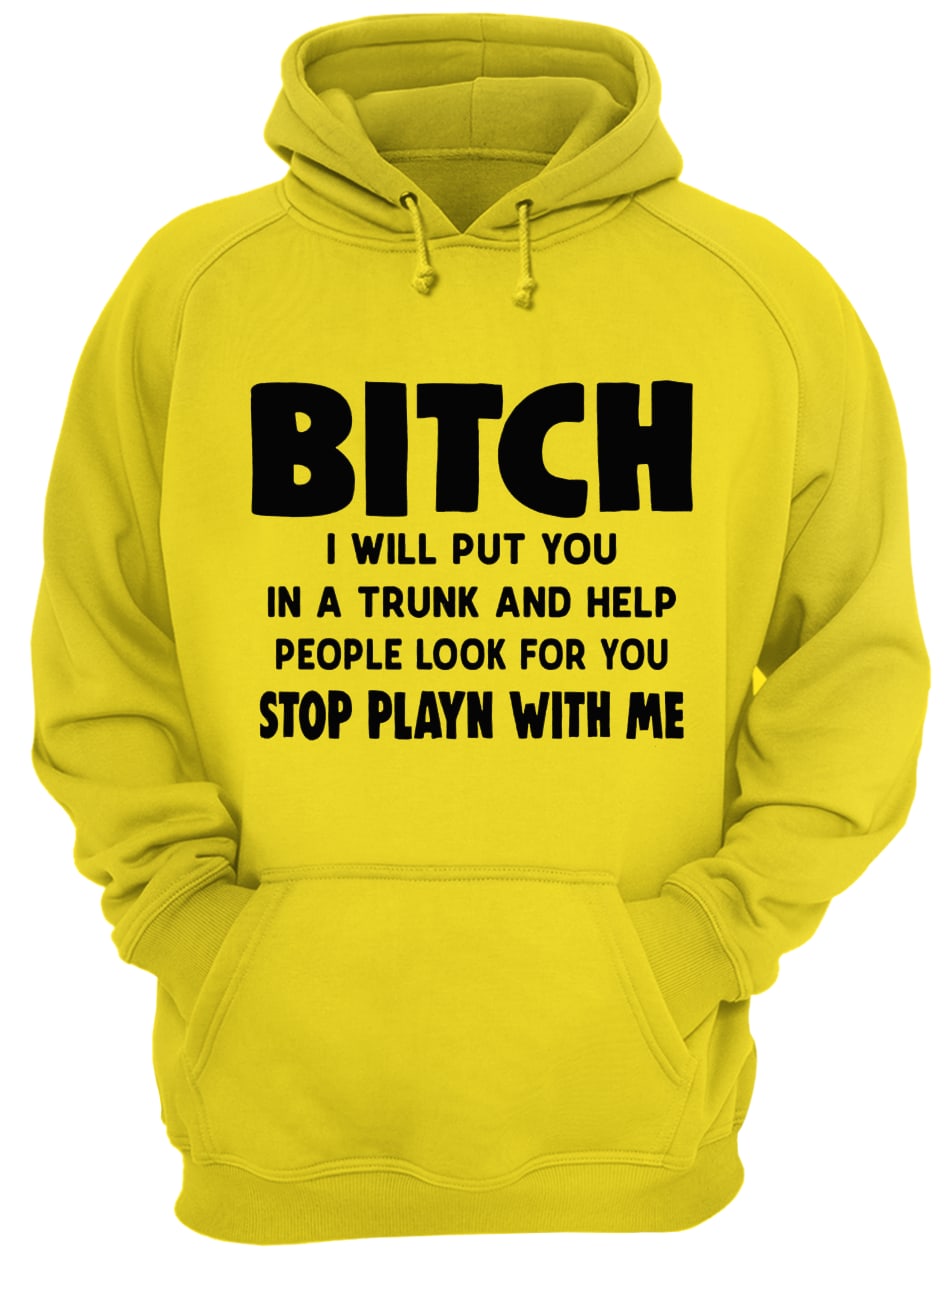 Bitch I will put you in the trunk and help people look for you stop playing with me hoodie